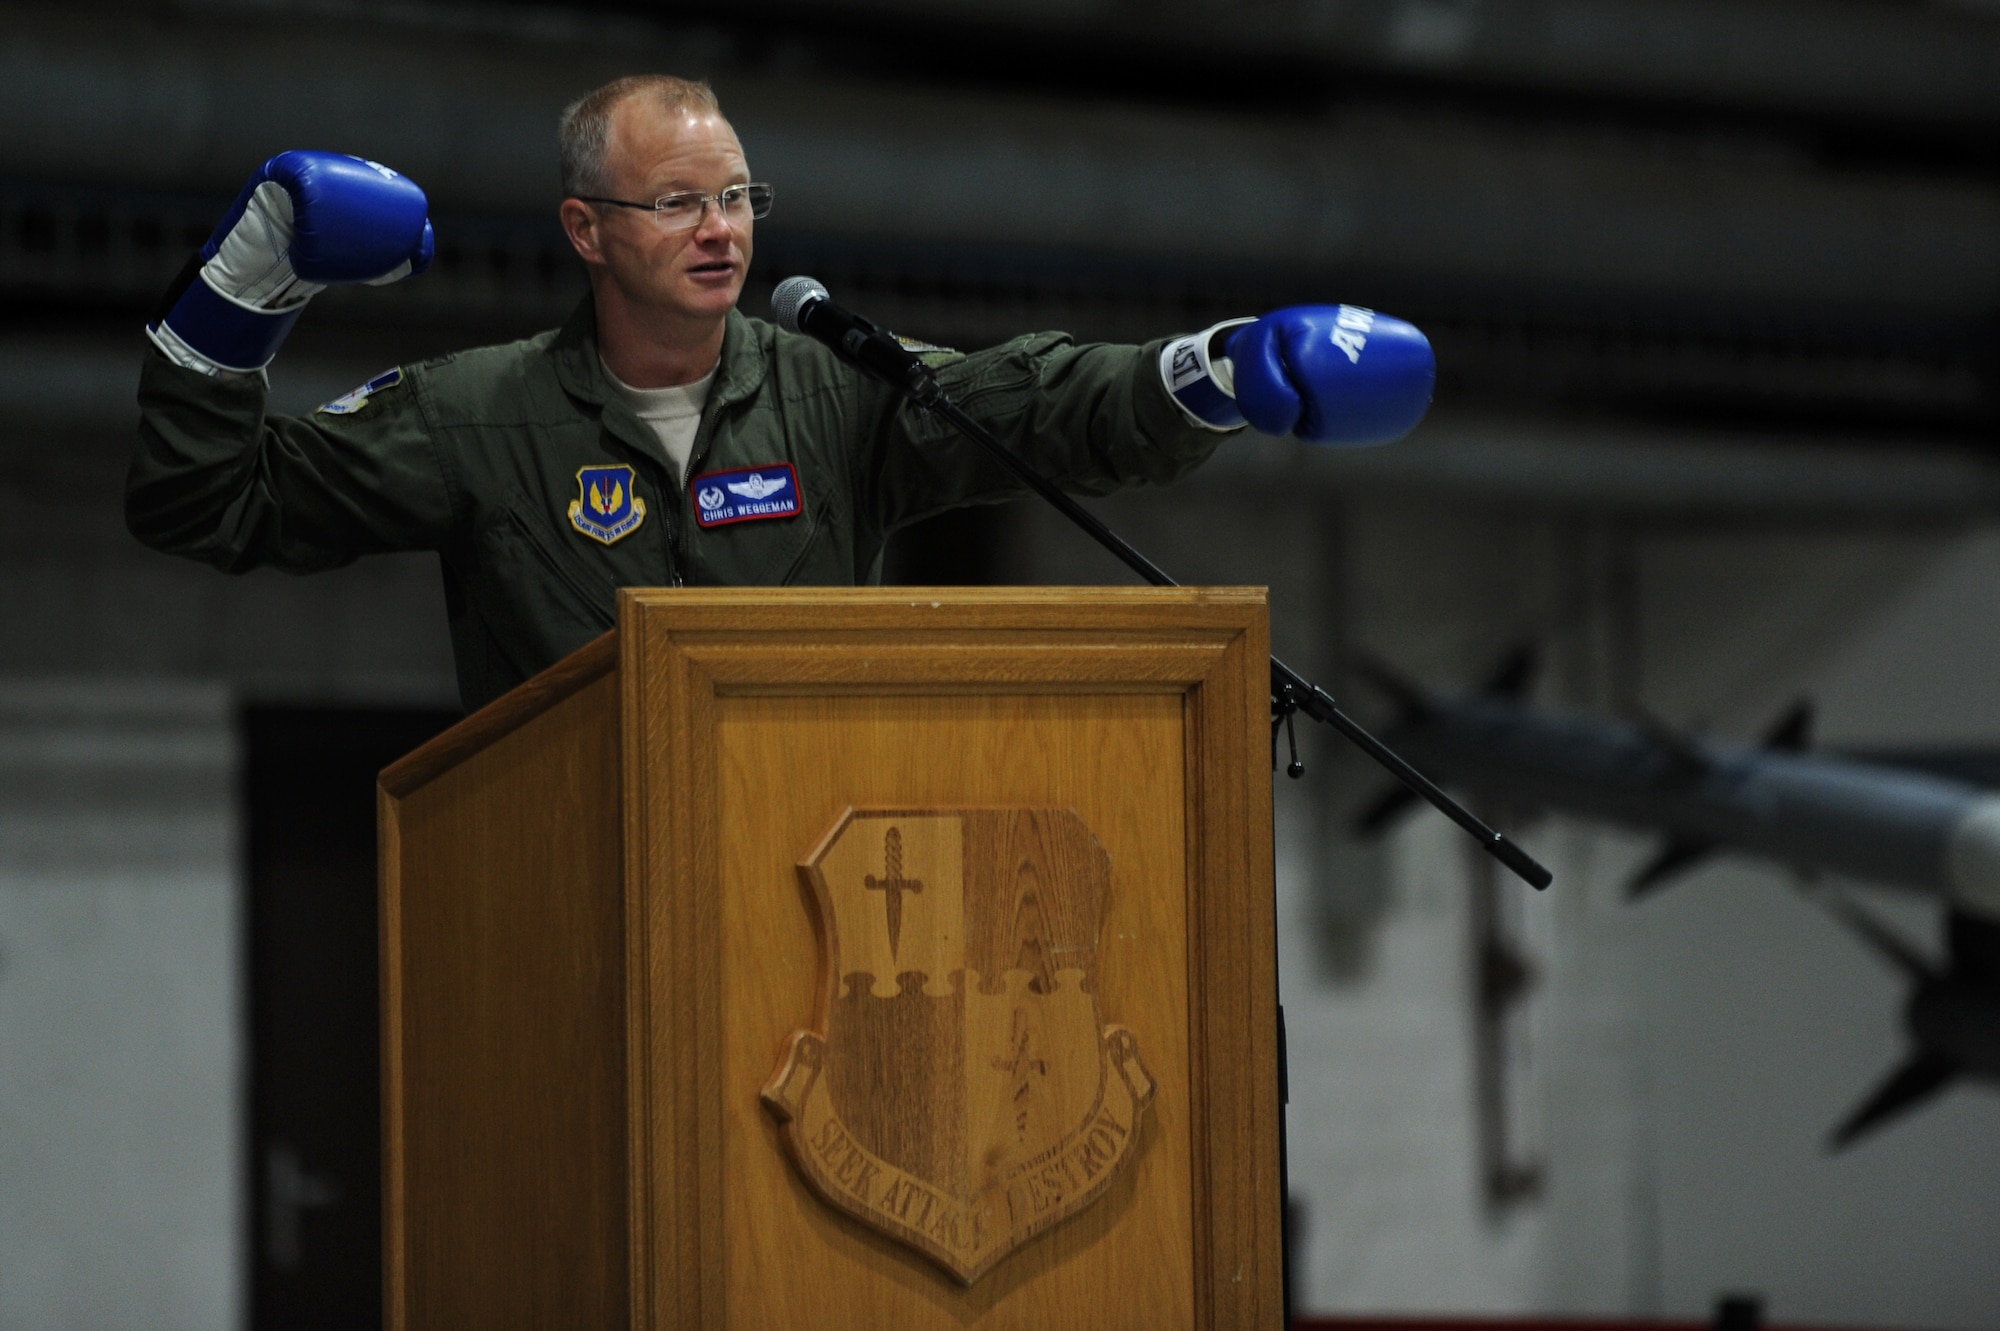 SPANGDAHLEM AIR BASE, Germany – Col. Chris Weggeman, 52nd Fighter Wing commander, uses boxing gloves to help illustrate the topic of his speech “Fly, Flight, Win” during the 2011 Maintenance Professional of the Year banquet at Hangar 1 here April 21. Airmen from the 52nd Maintenance Group and 52nd Munitions Maintenance Group attended the banquet to recognize contributions made by maintenance professionals to mission readiness throughout the year. The banquet also included awards for Airmen and teams who went above and the beyond the established standards for their job performance. (U.S. Air Force photo by Airman 1st Class Matthew B. Fredericks/Released)